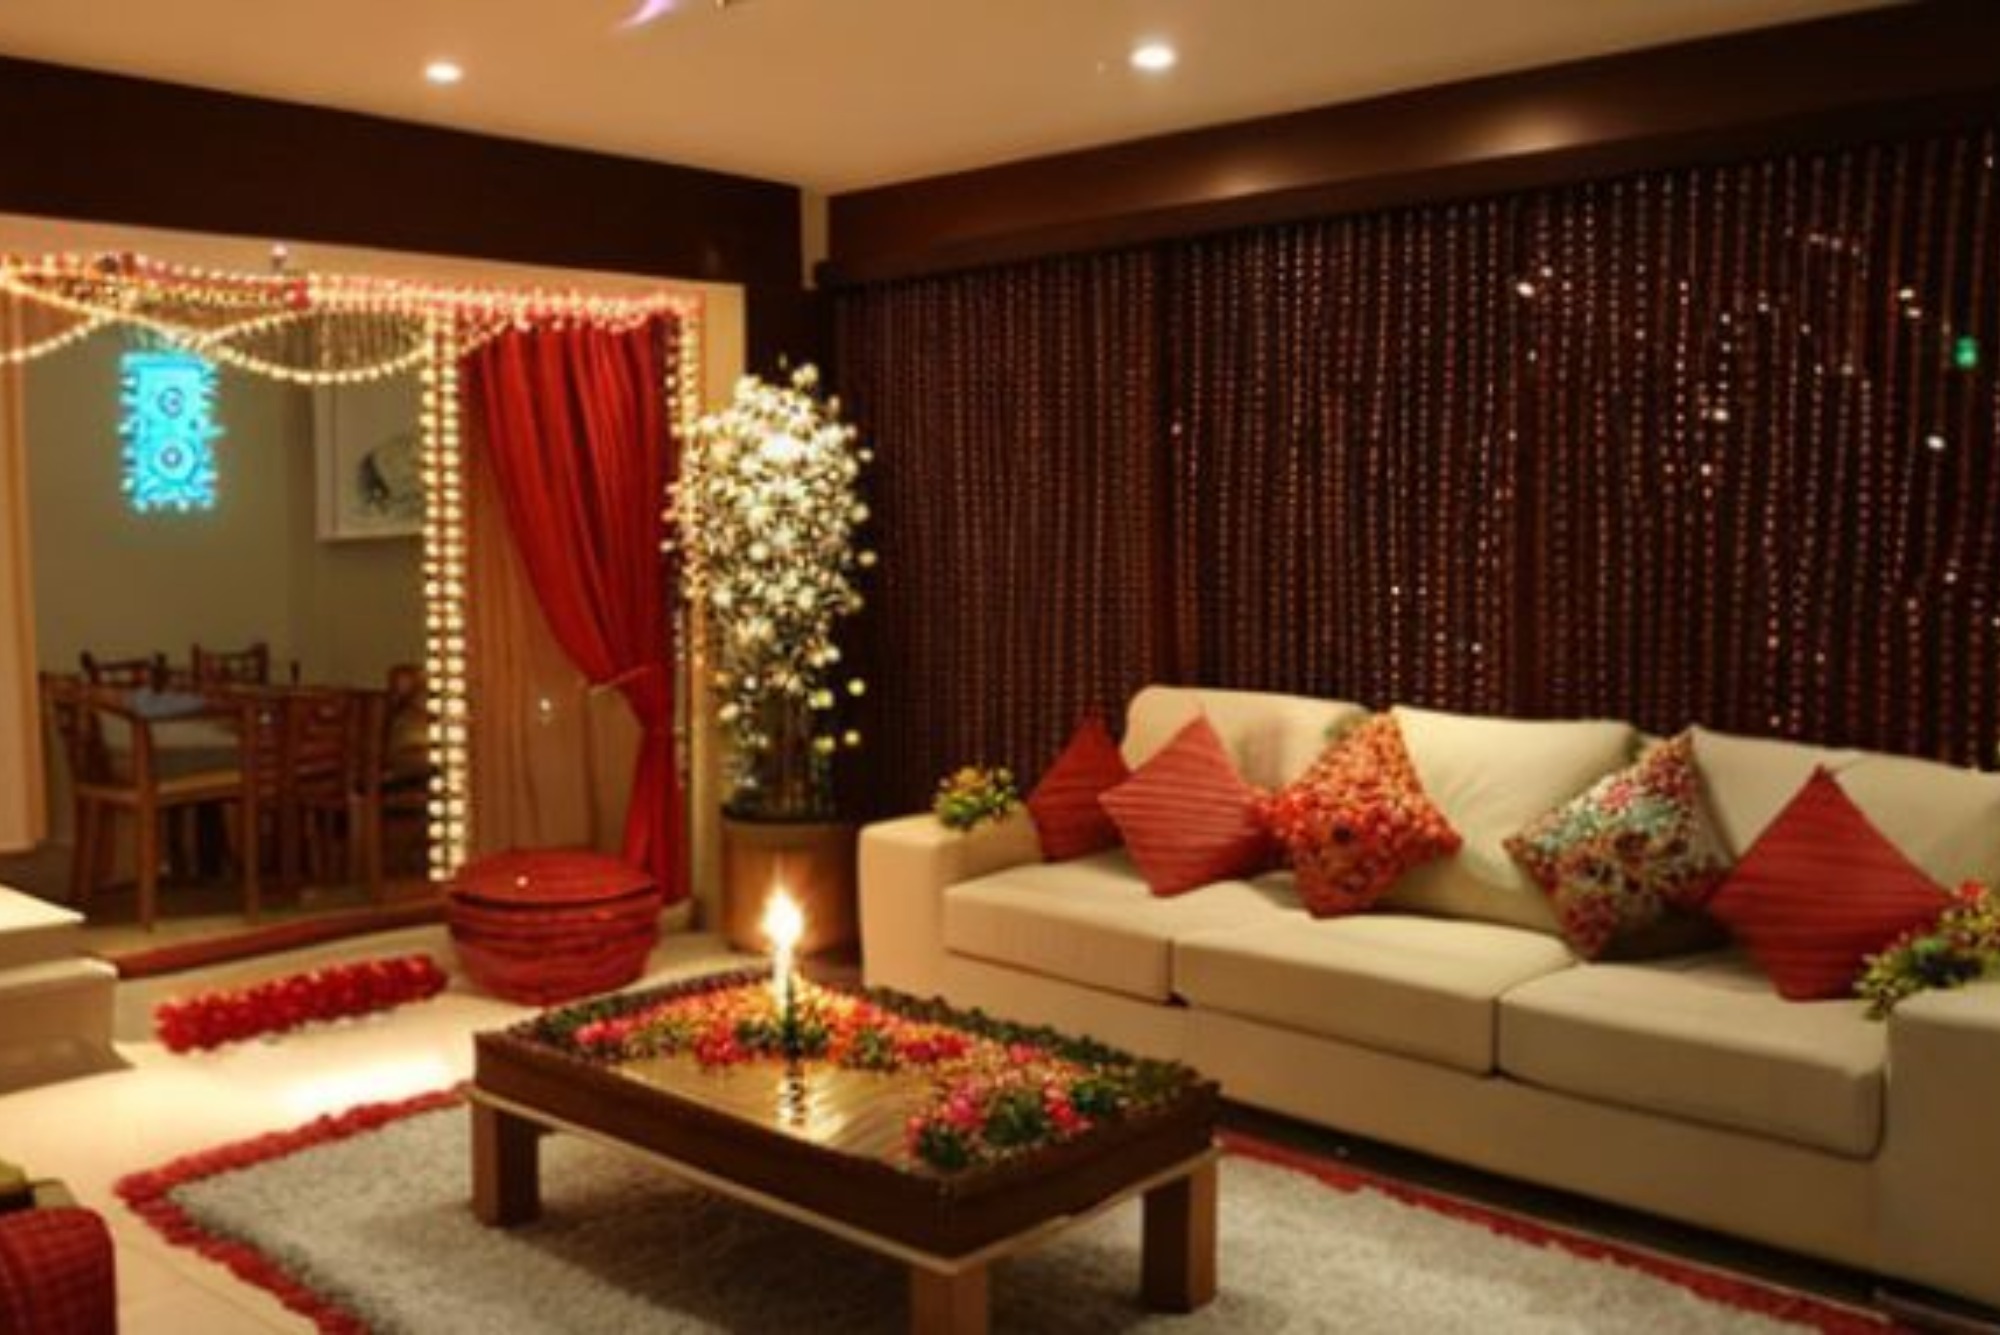 Diwali Decorations for Home: